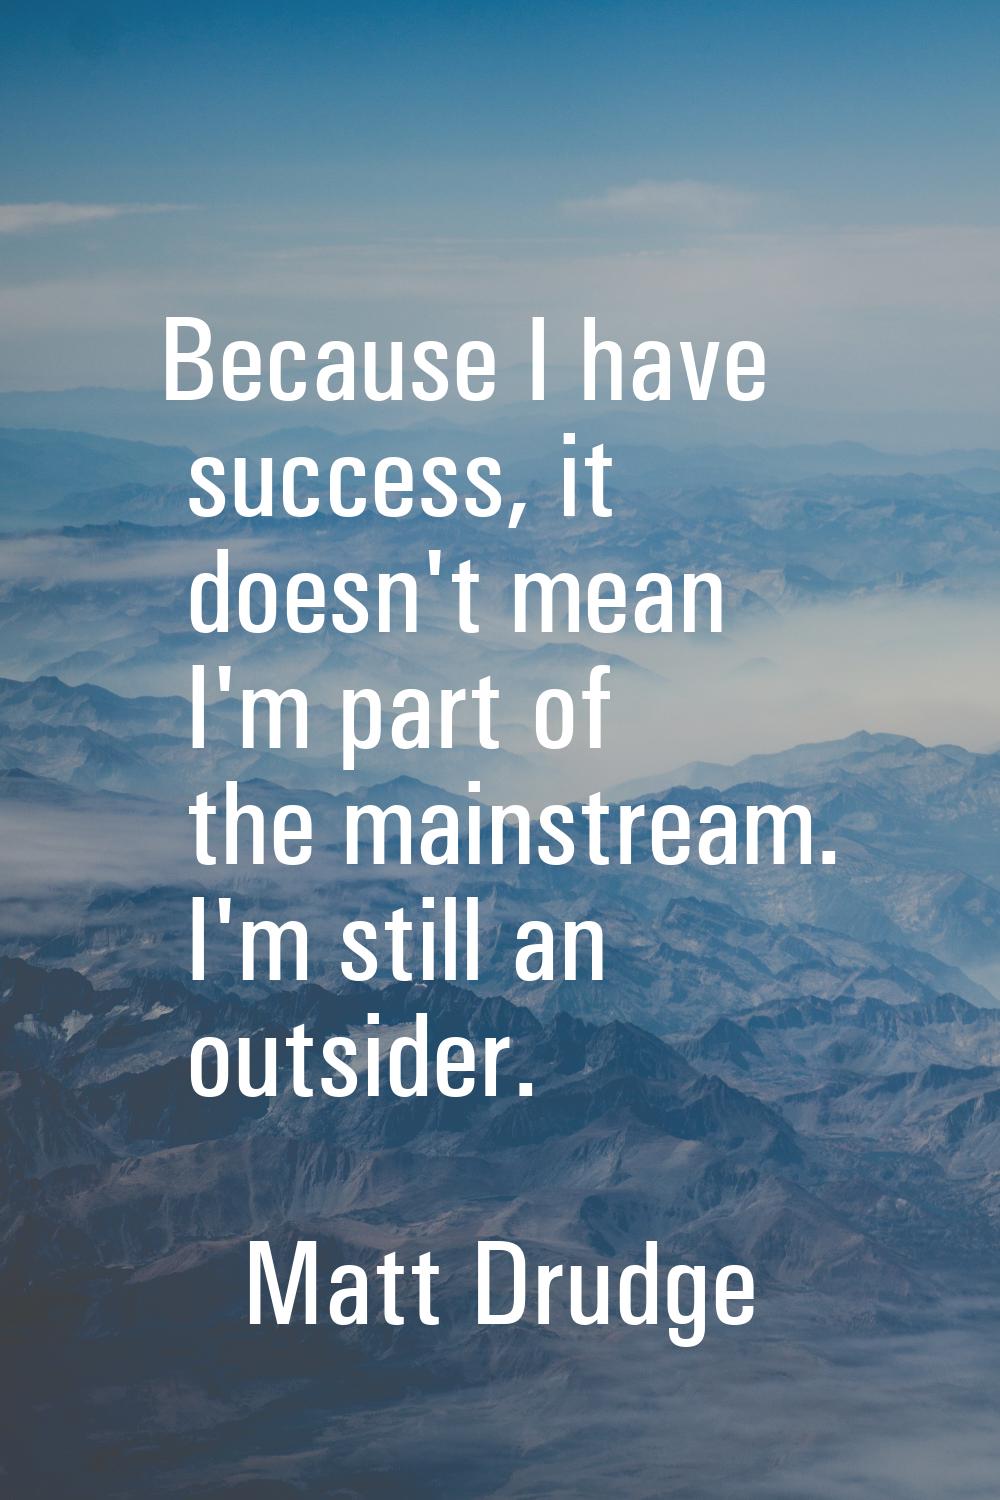 Because I have success, it doesn't mean I'm part of the mainstream. I'm still an outsider.